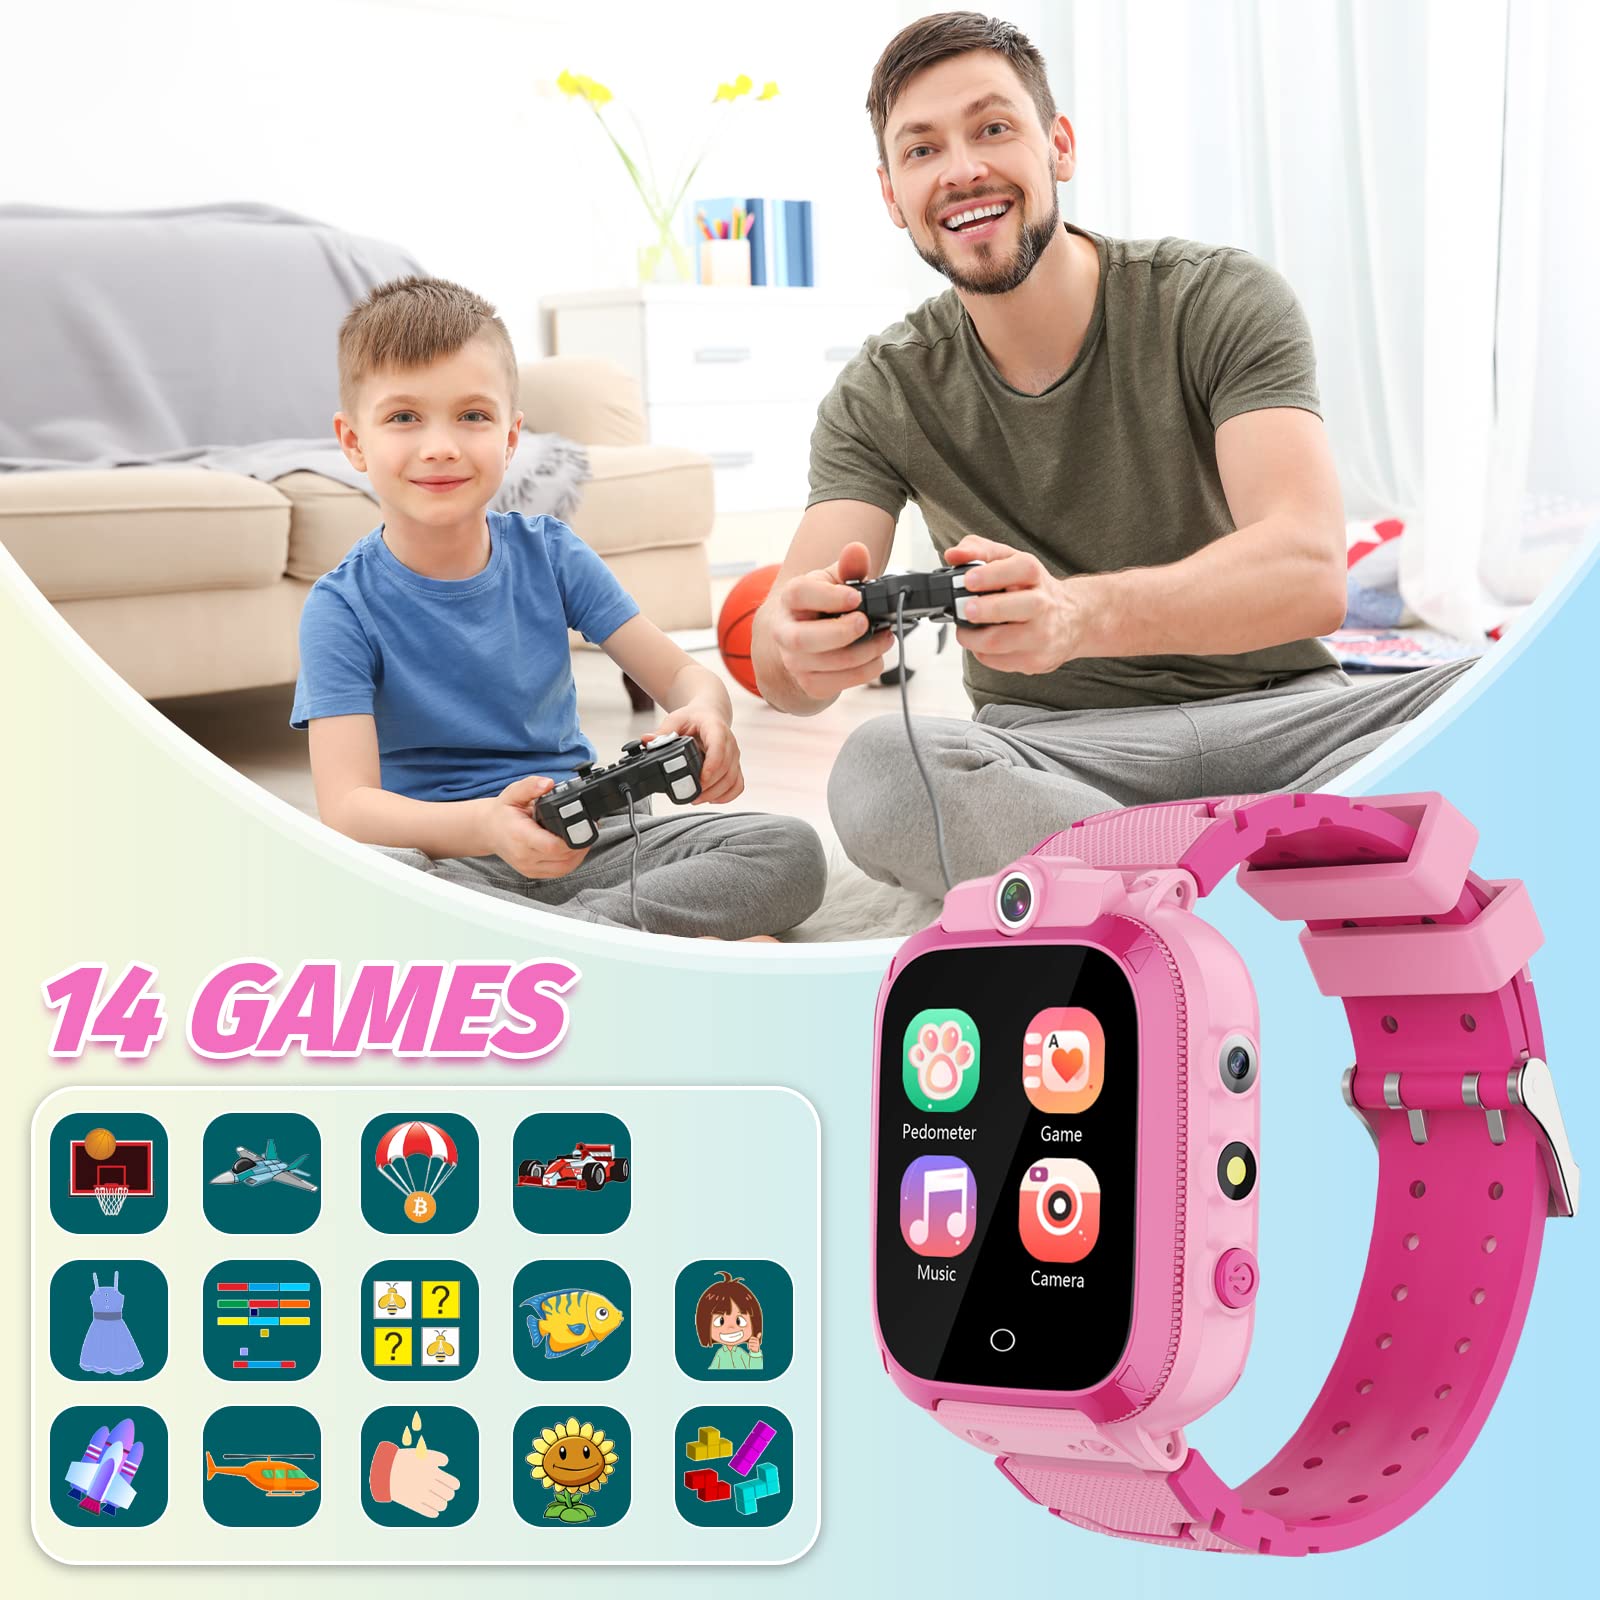 Kids Smart Watch for Girls Boys Ages 3-12 Years,Toddler Wrist Watch mp3 music player 14 Puzzle Games with Dual Cameras Video Player/Recorder Pedometer Torch Children Birthday Festival Gifts Toys